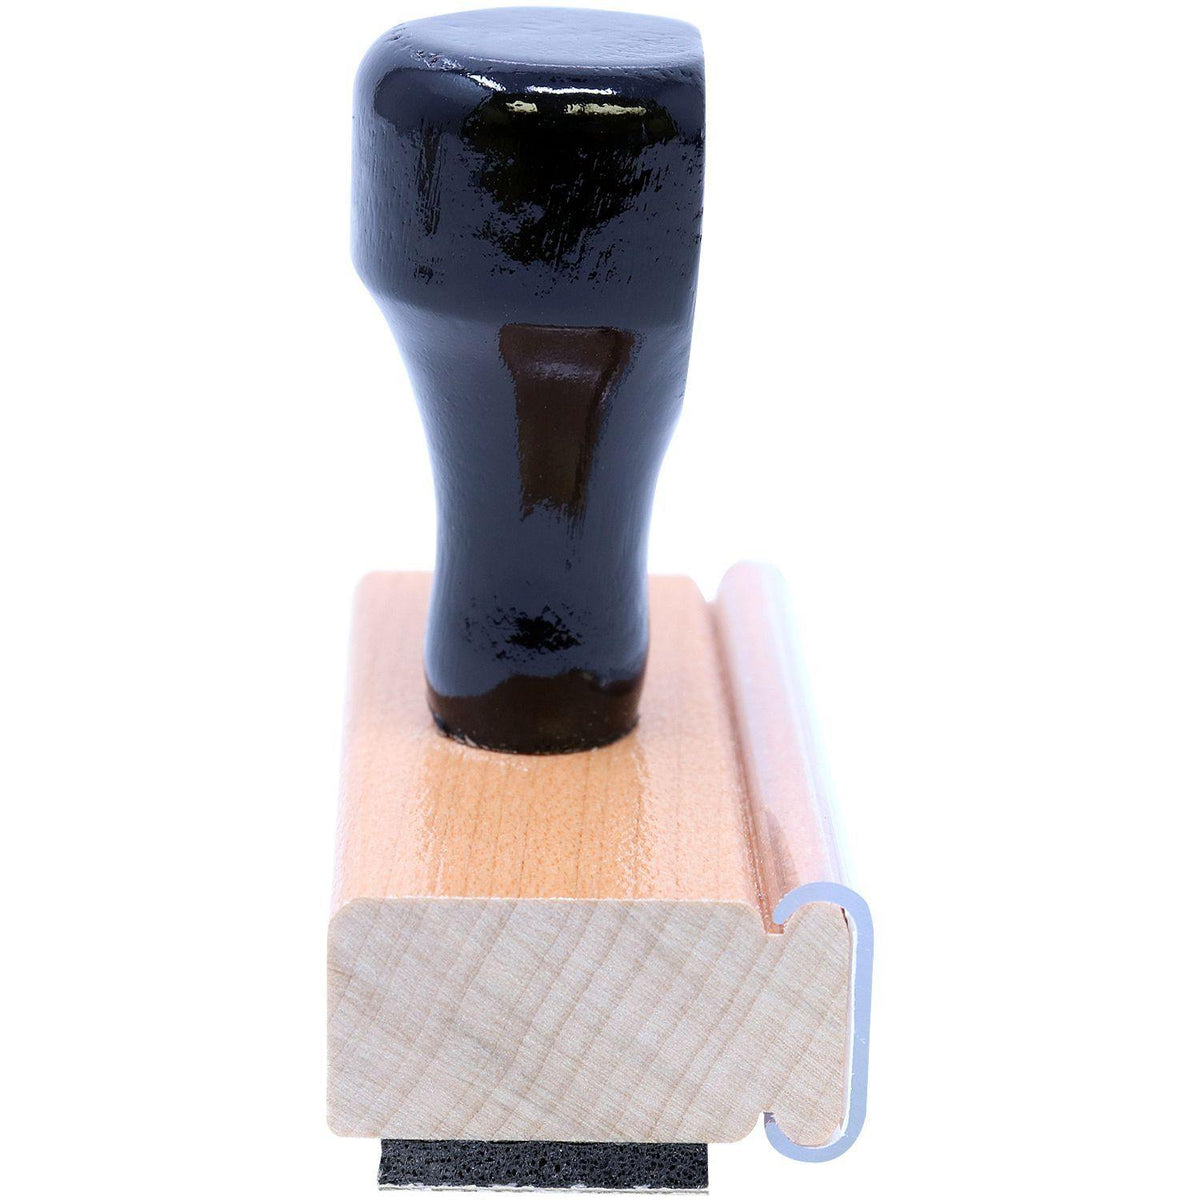 Personal Confidential Rubber Stamp - Engineer Seal Stamps - Brand_Acorn, Impression Size_Small, Stamp Type_Regular Stamp, Type of Use_Business, Type of Use_General